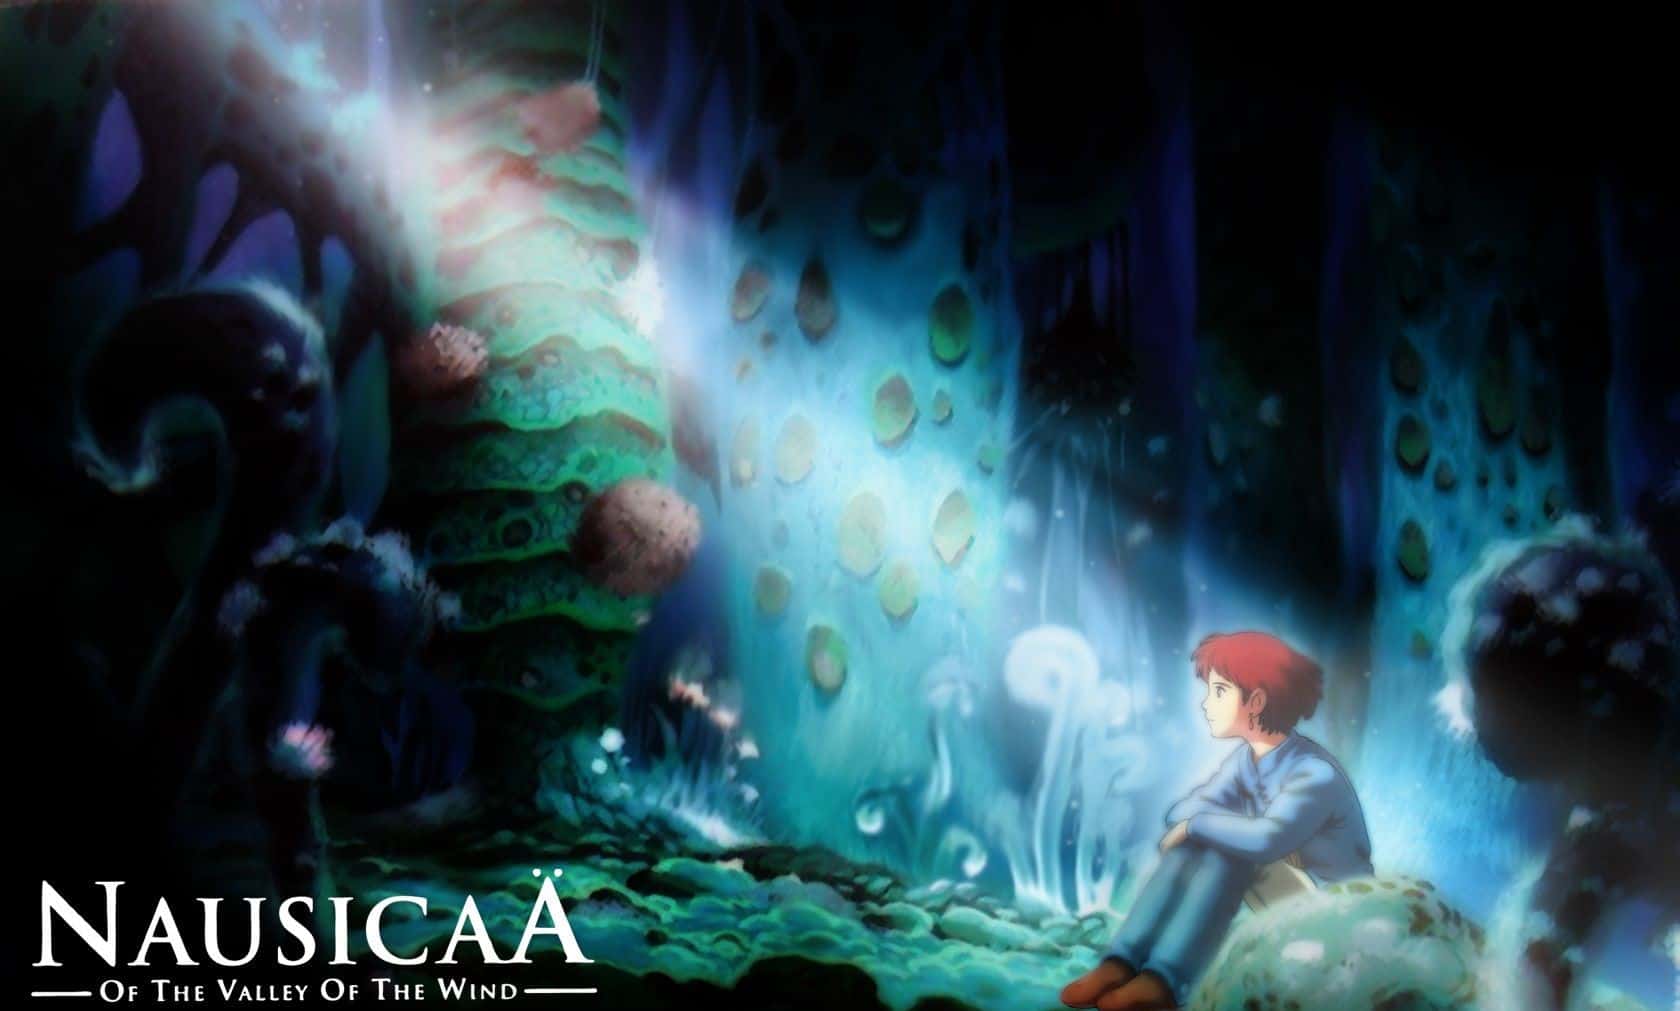 Nausicaa sitting in the toxic environment